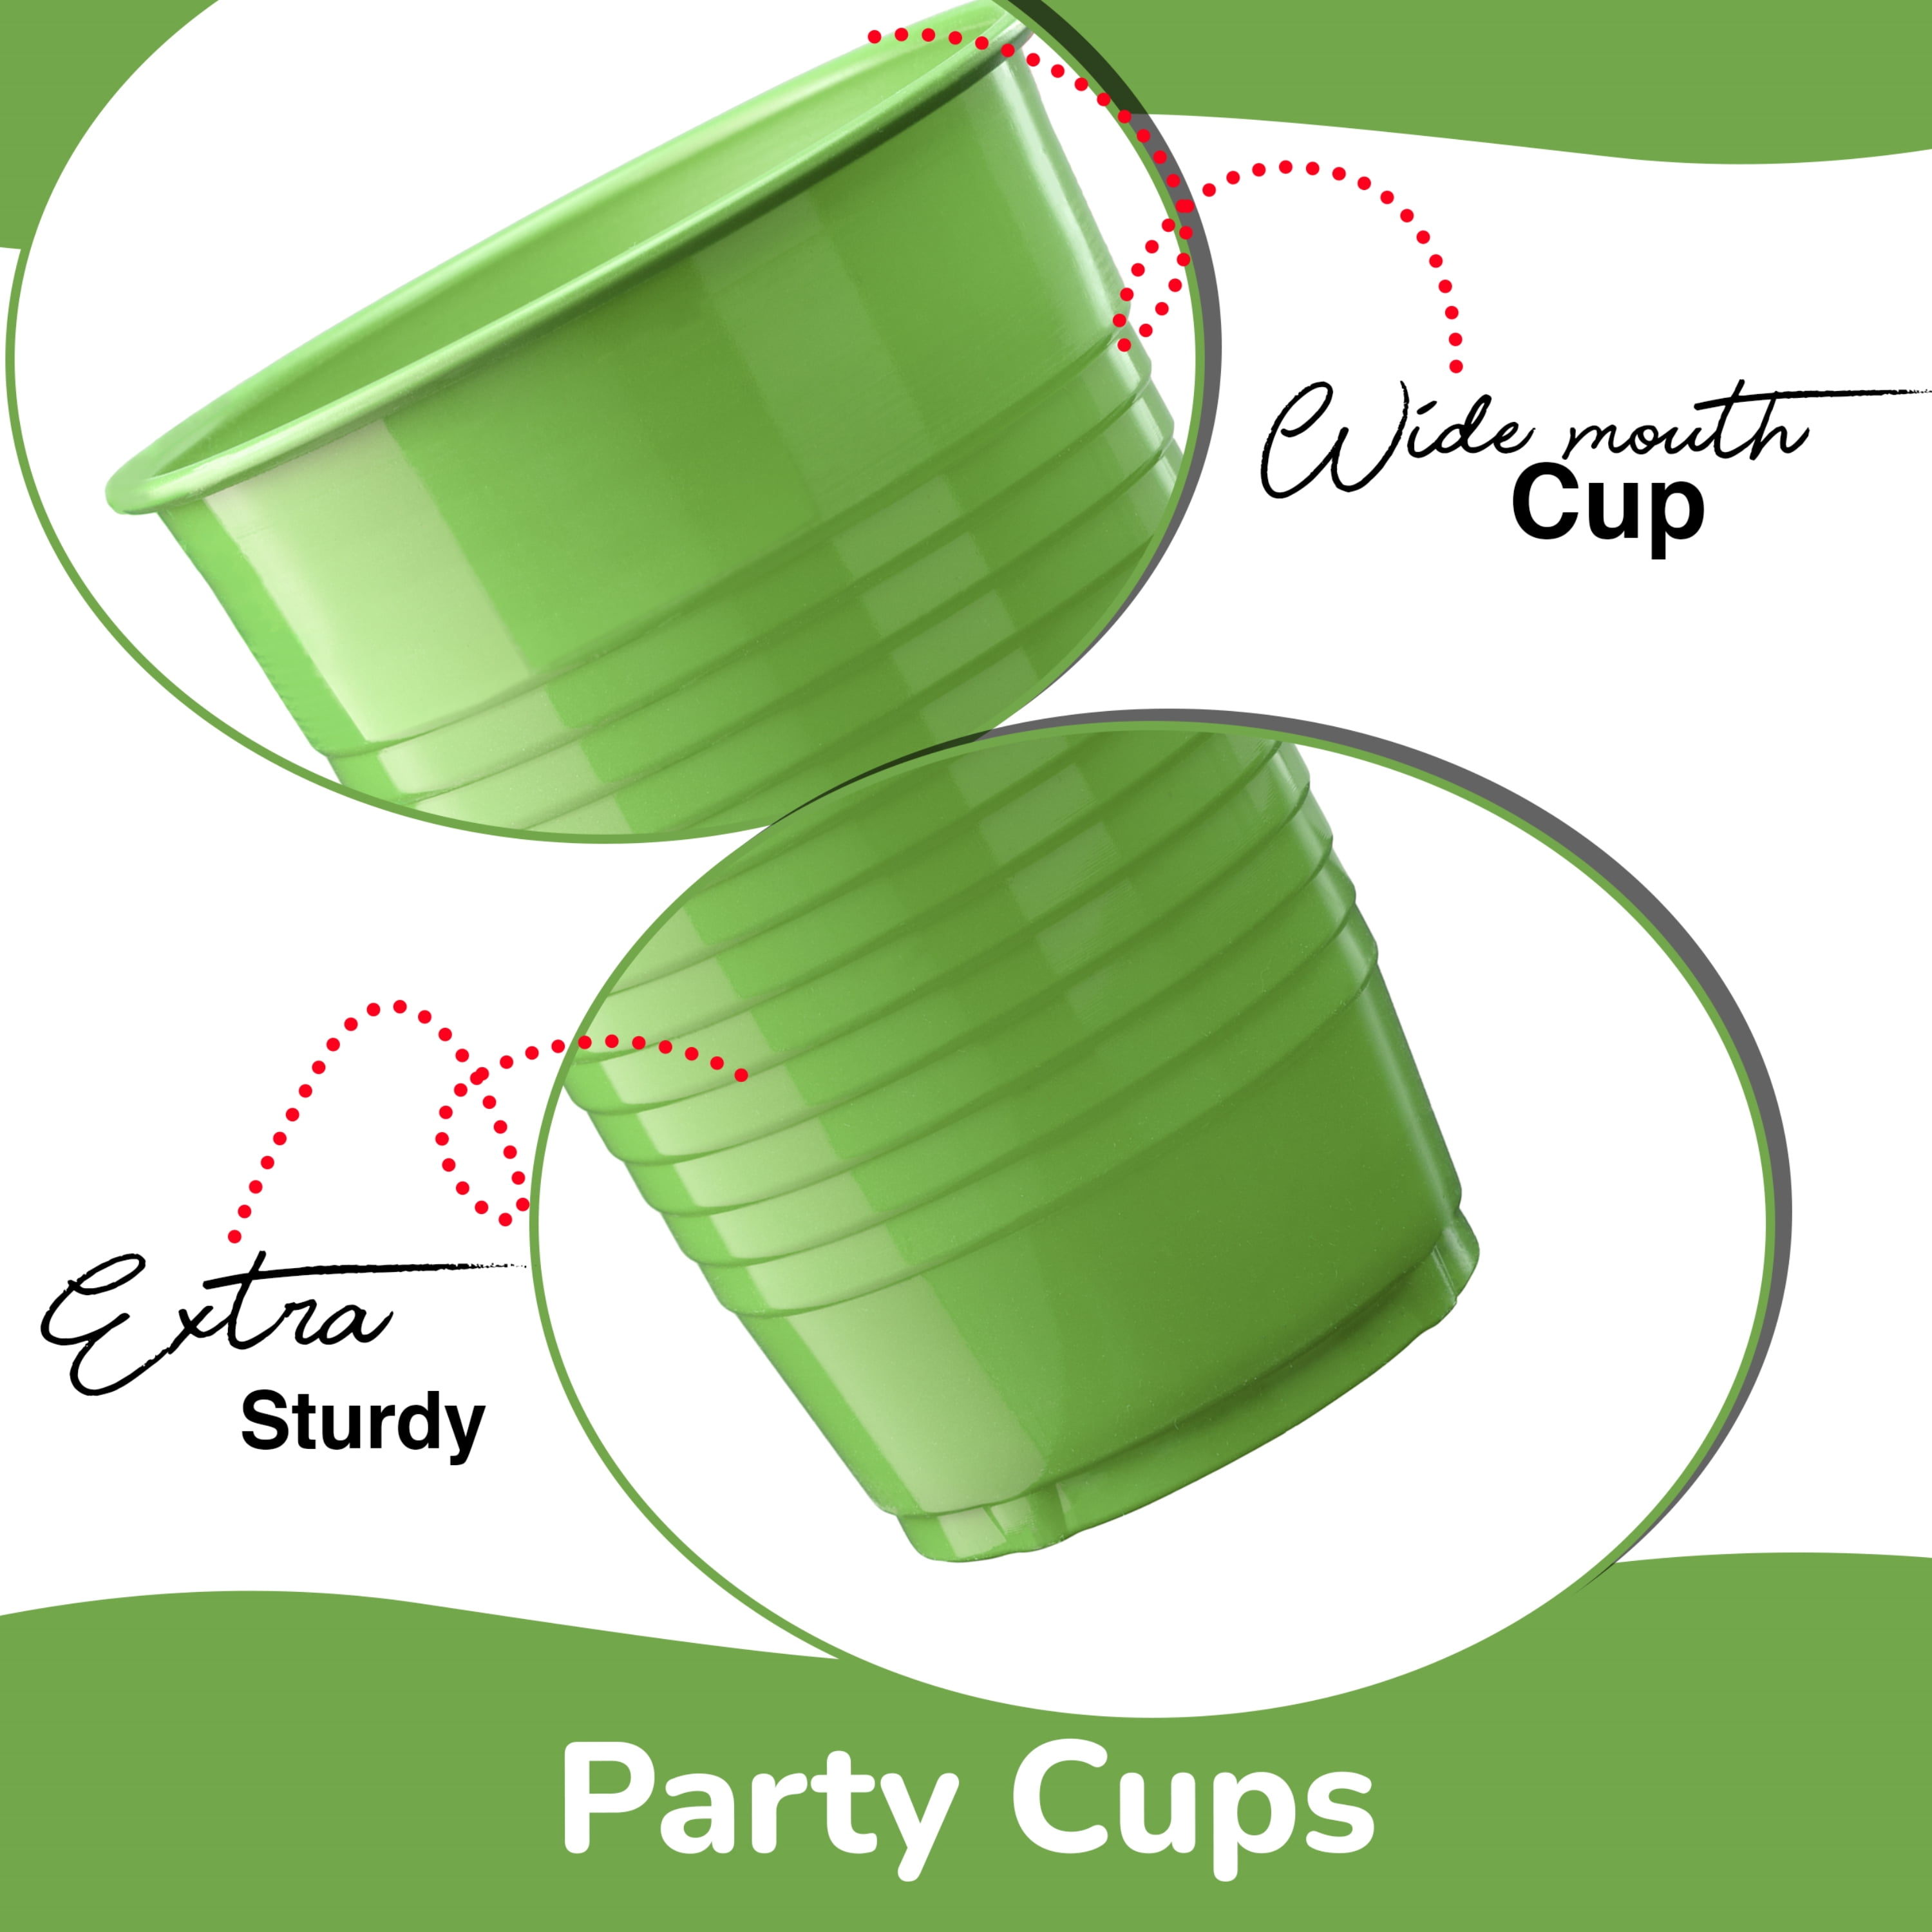 12 Oz. Lime Green Plastic Cups - 50 Ct.